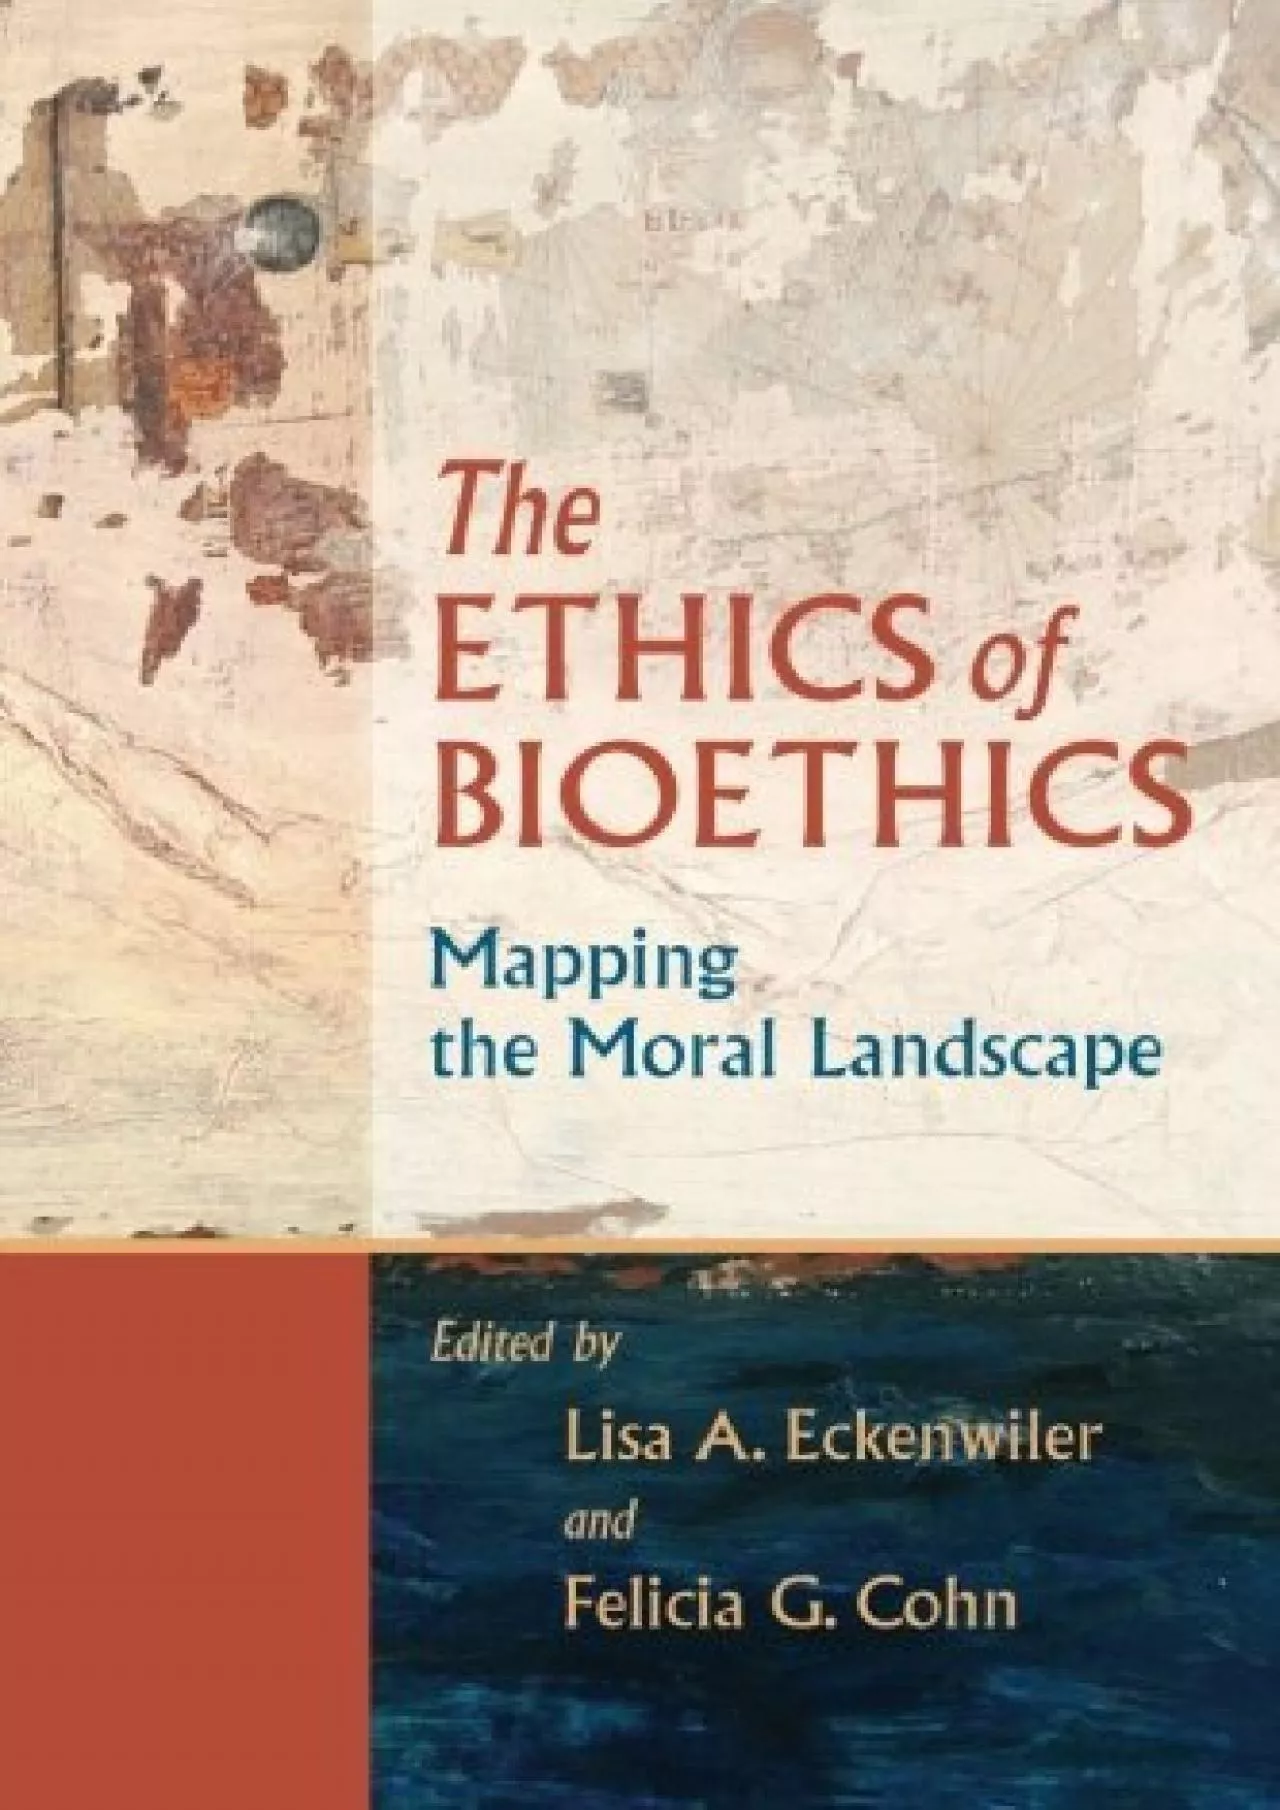 (BOOK)-The Ethics of Bioethics: Mapping the Moral Landscape